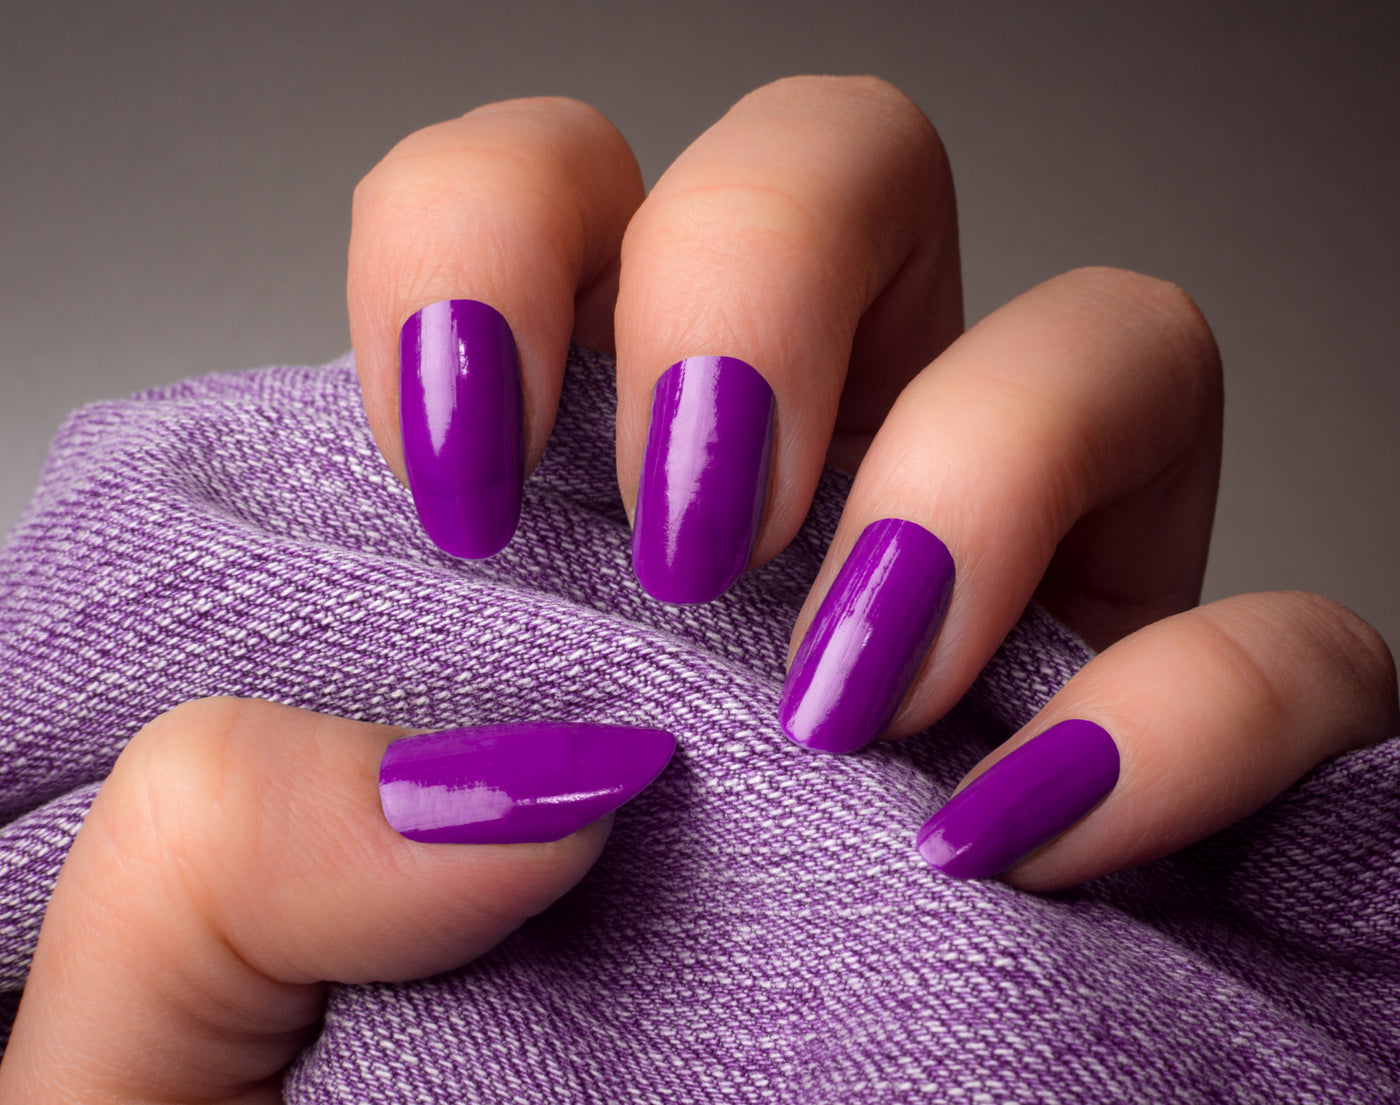 How To Do Acrylic Nails At Home? Safe And Complete Guide For You